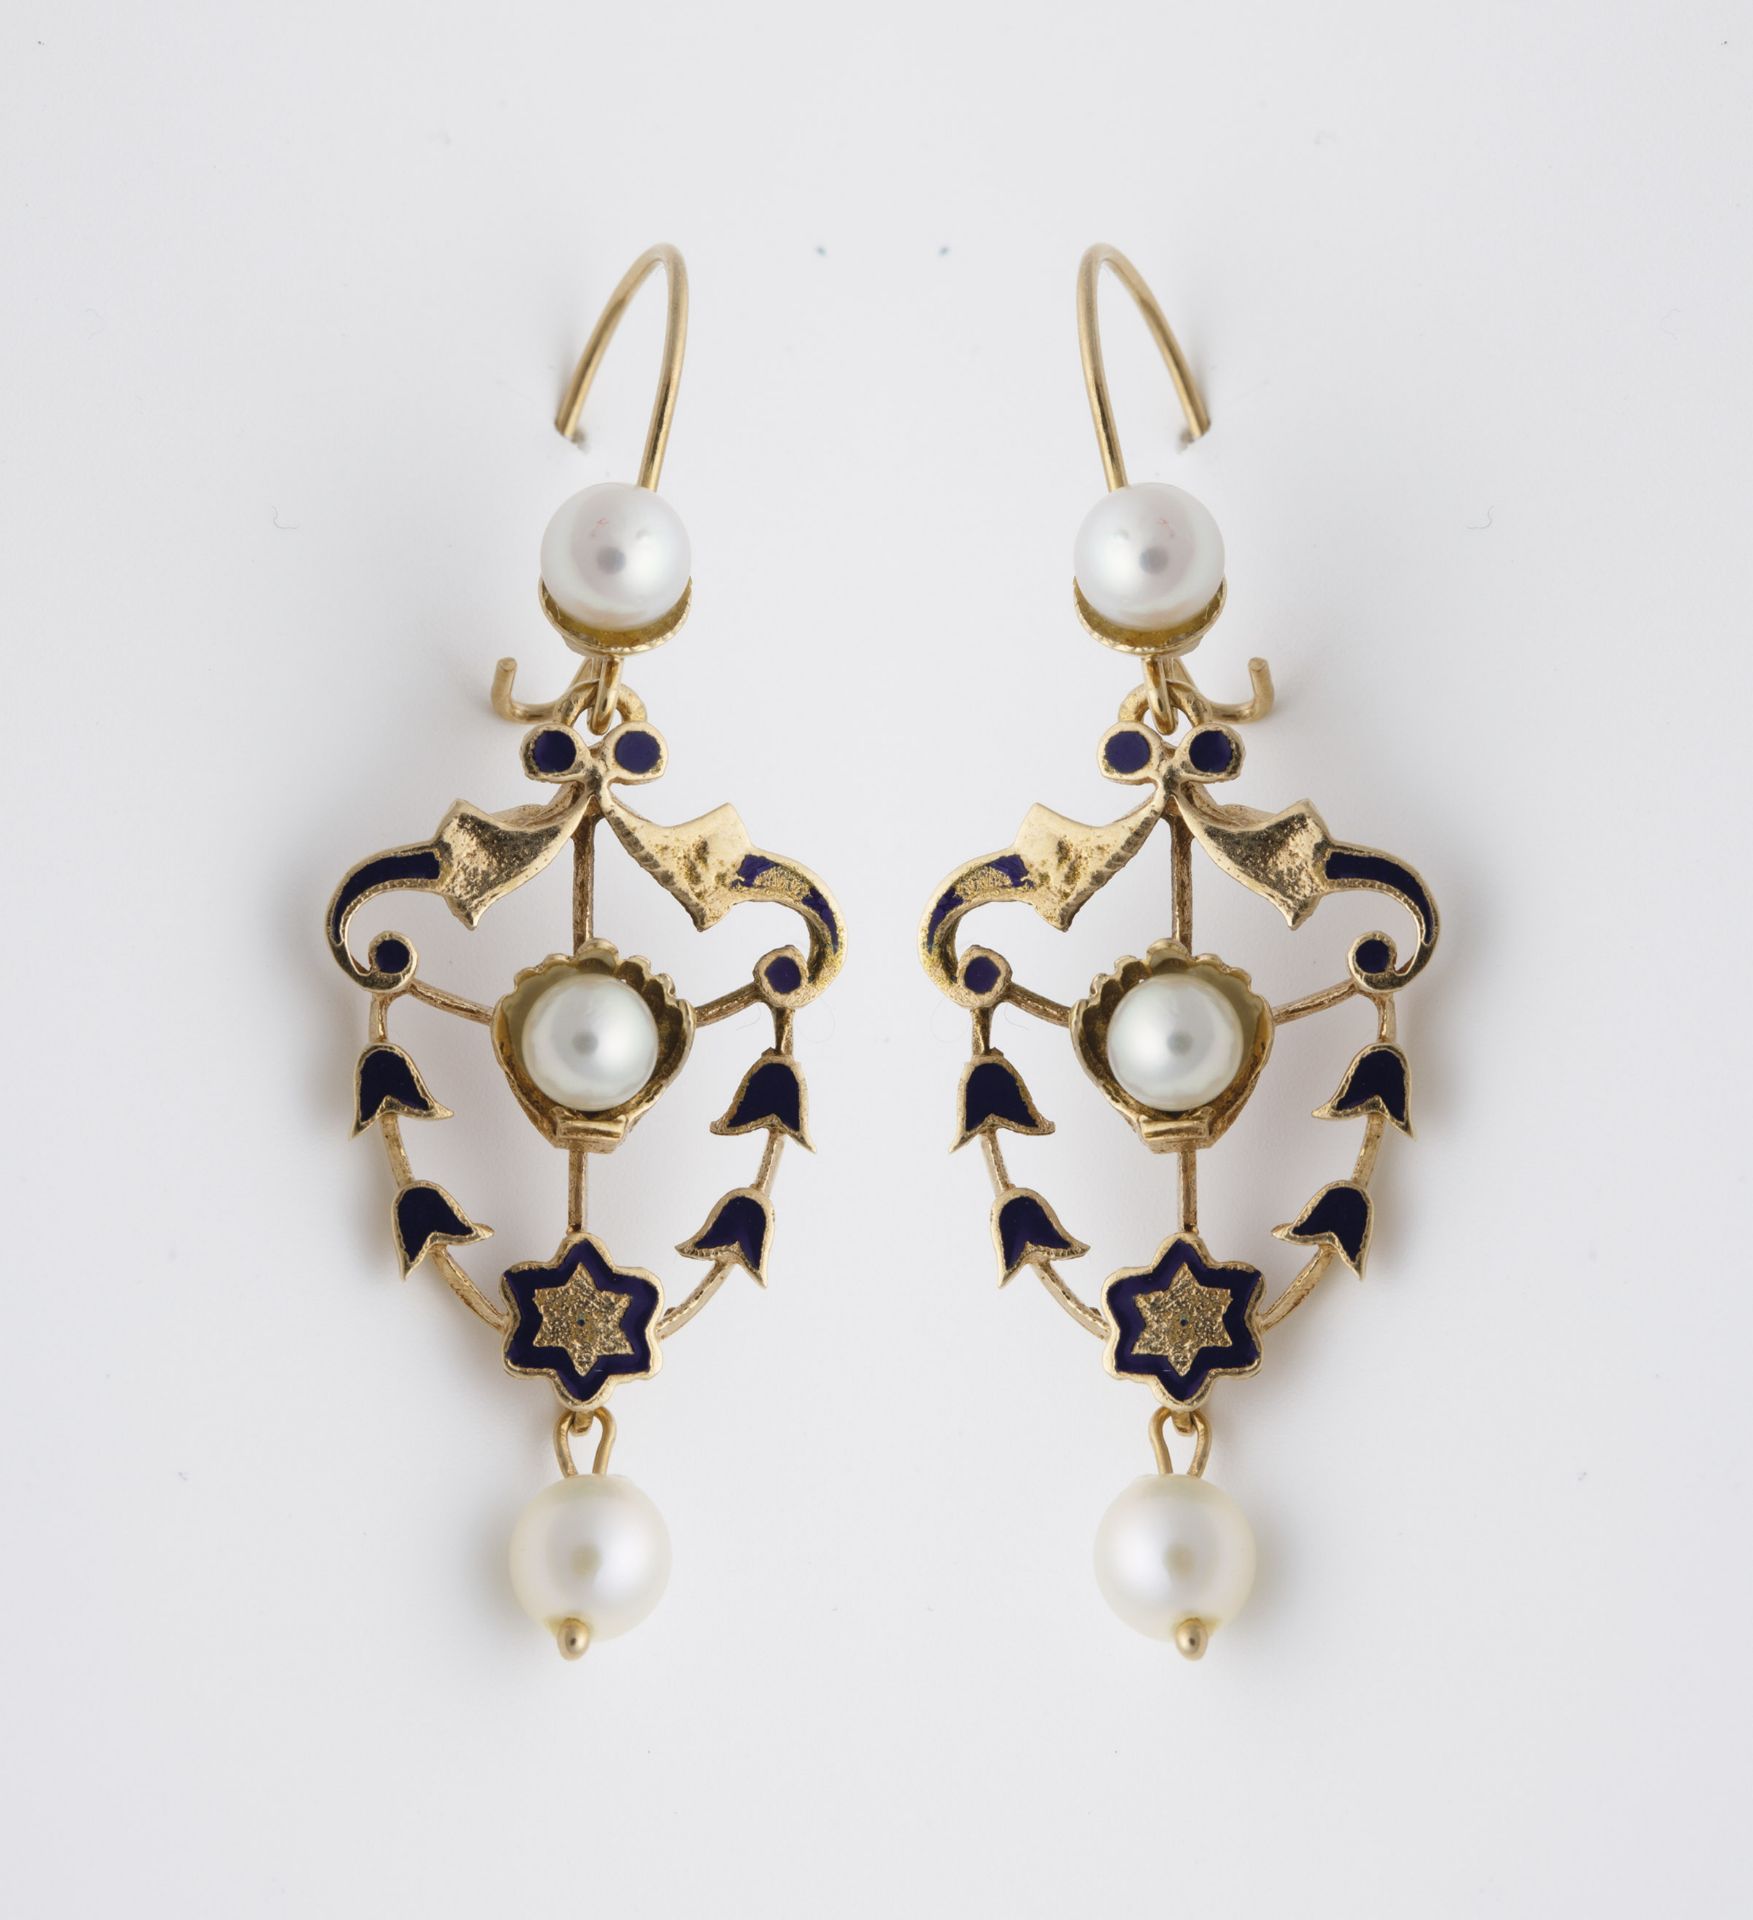 Pair of earrings with pearls and blue enamel